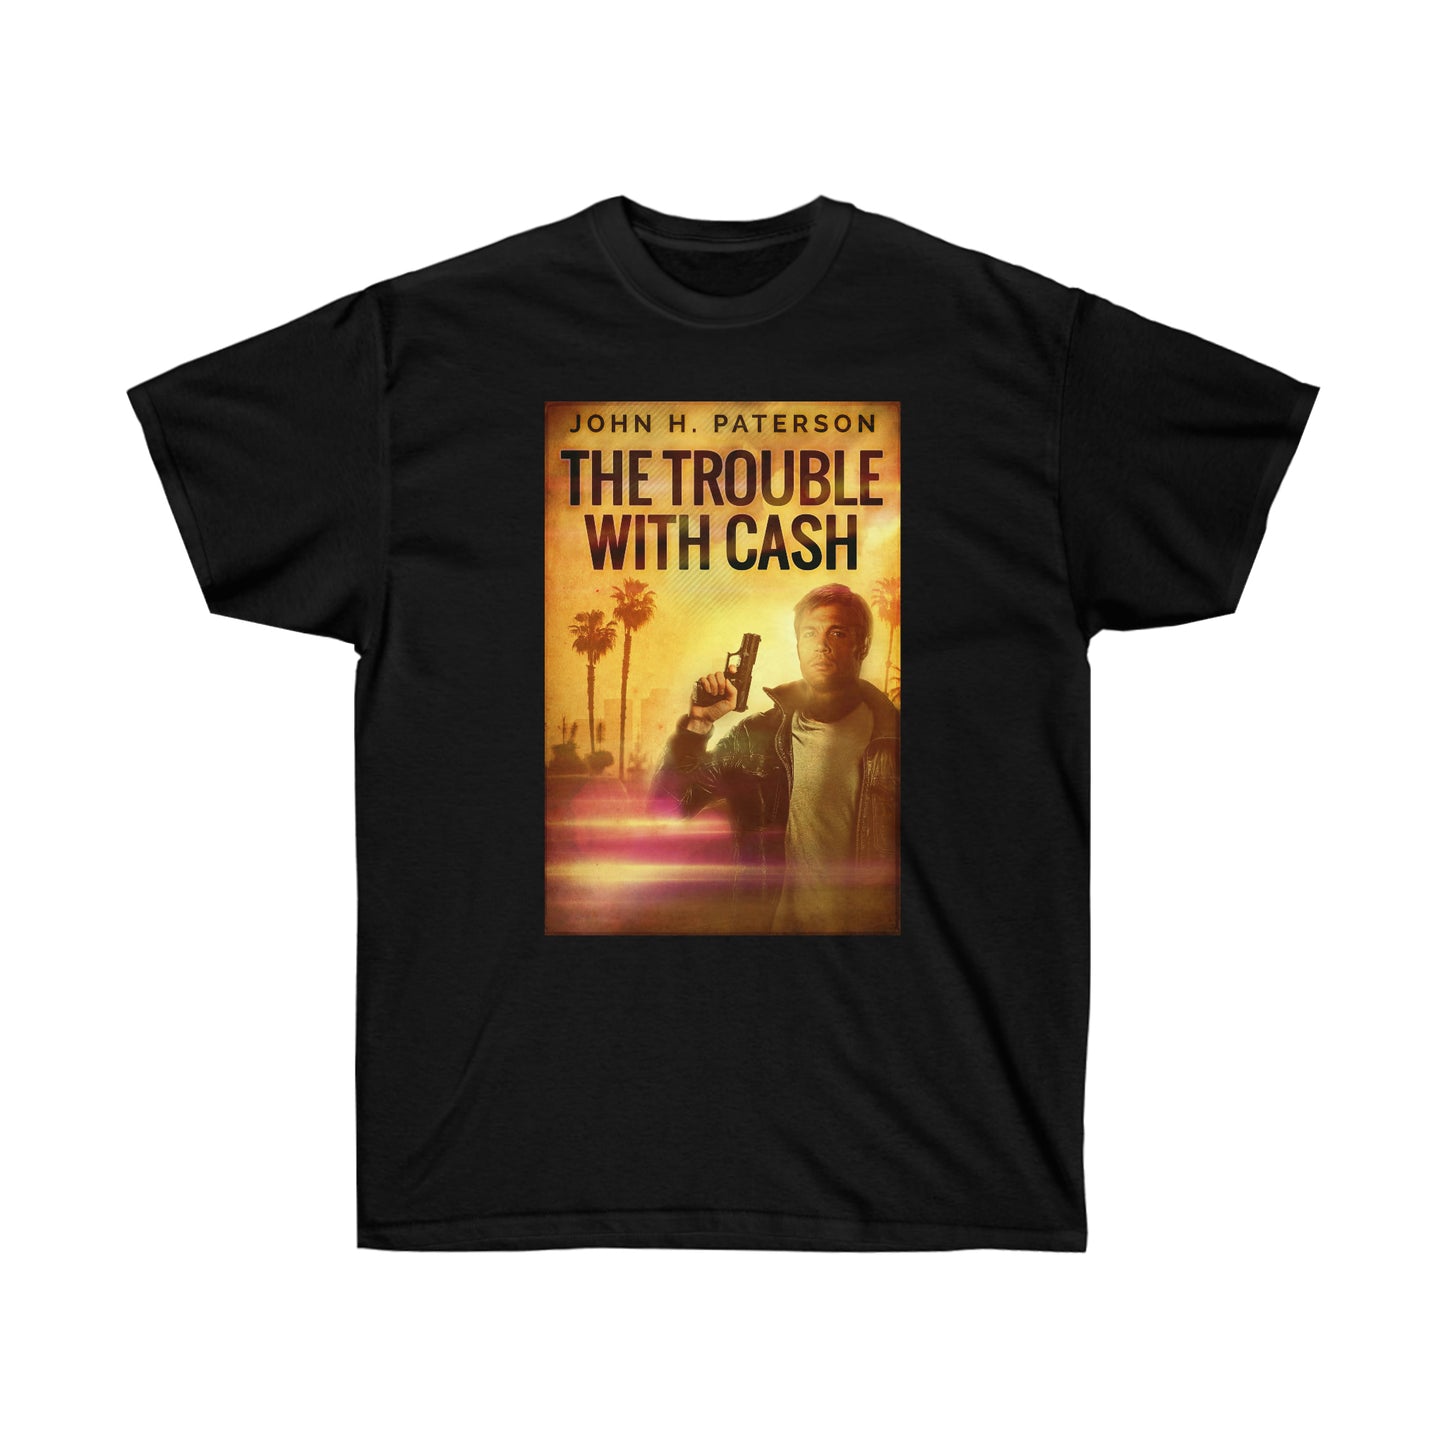 The Trouble with Cash - Unisex T-Shirt